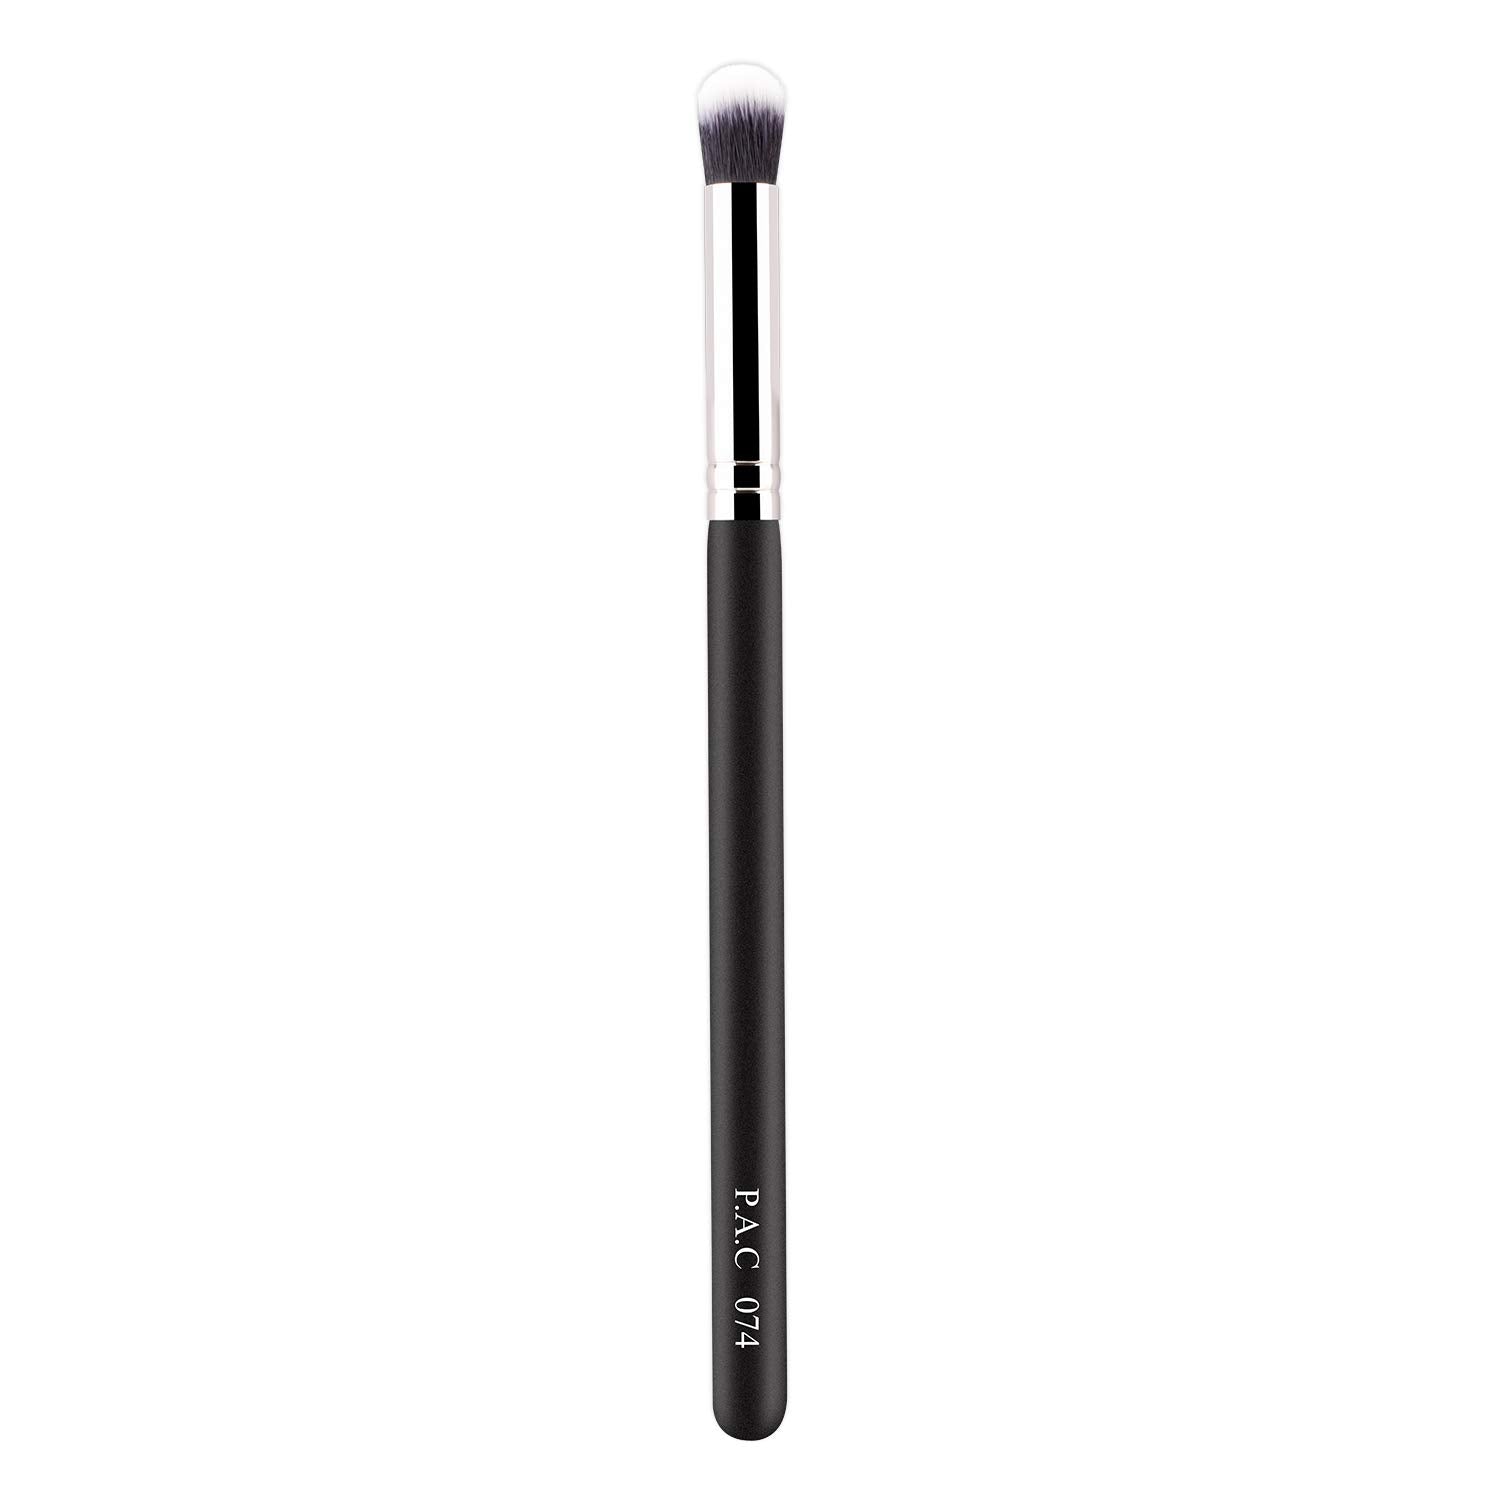 PAC Concealer Brush 074 PAC